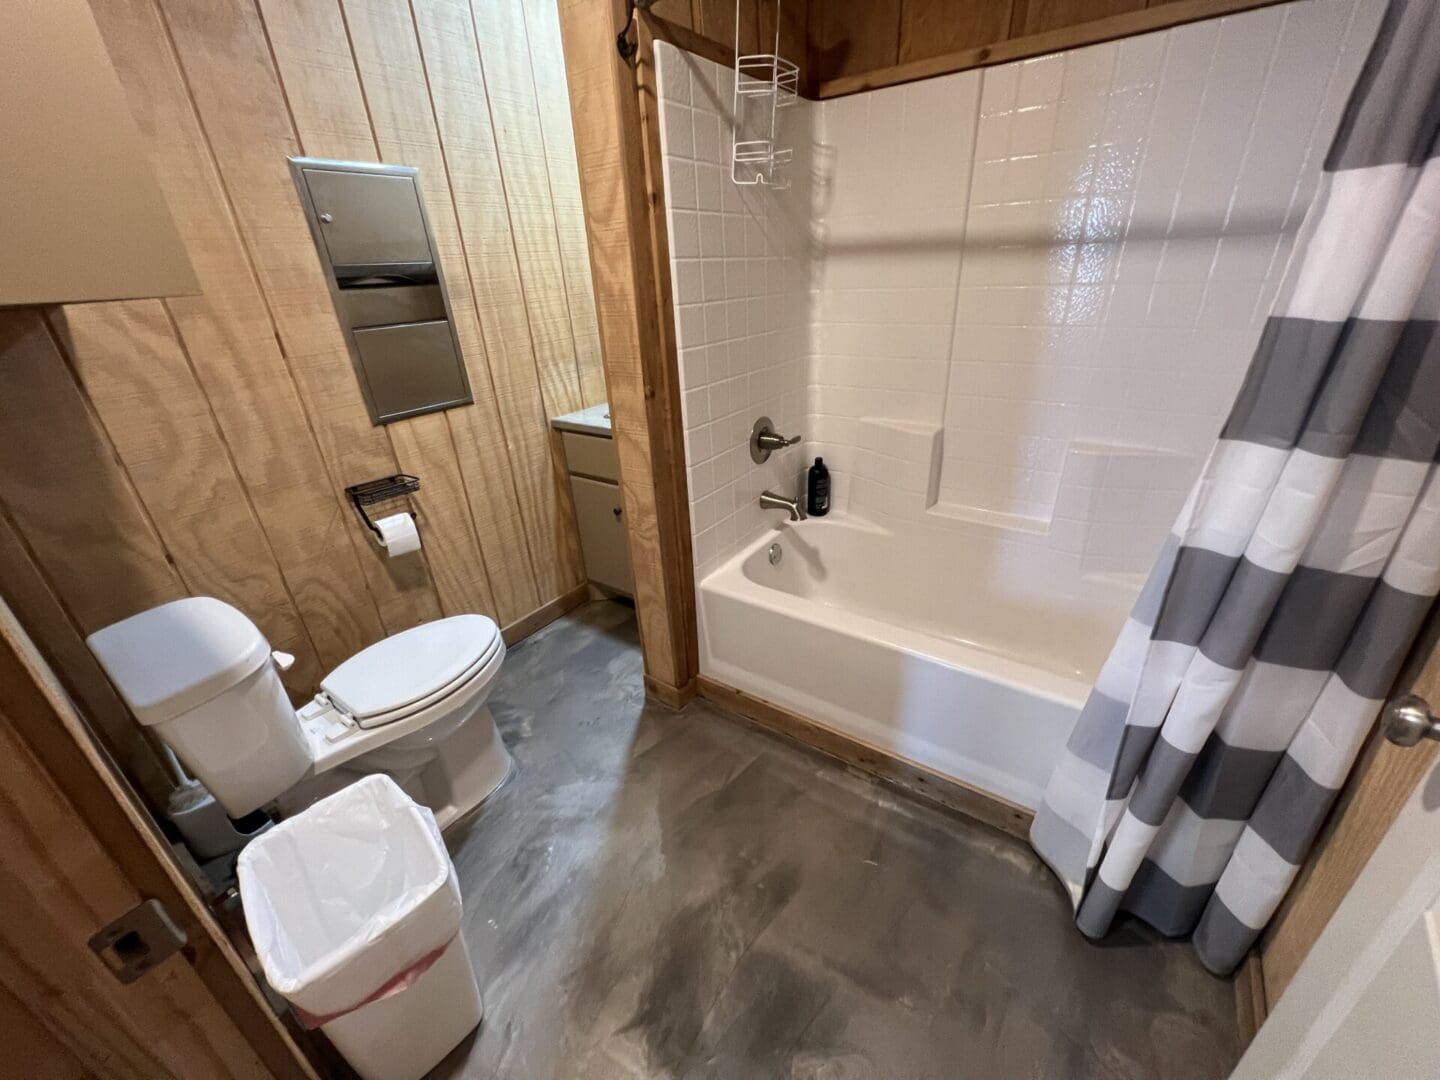 Bath tub and toilet inside the field house